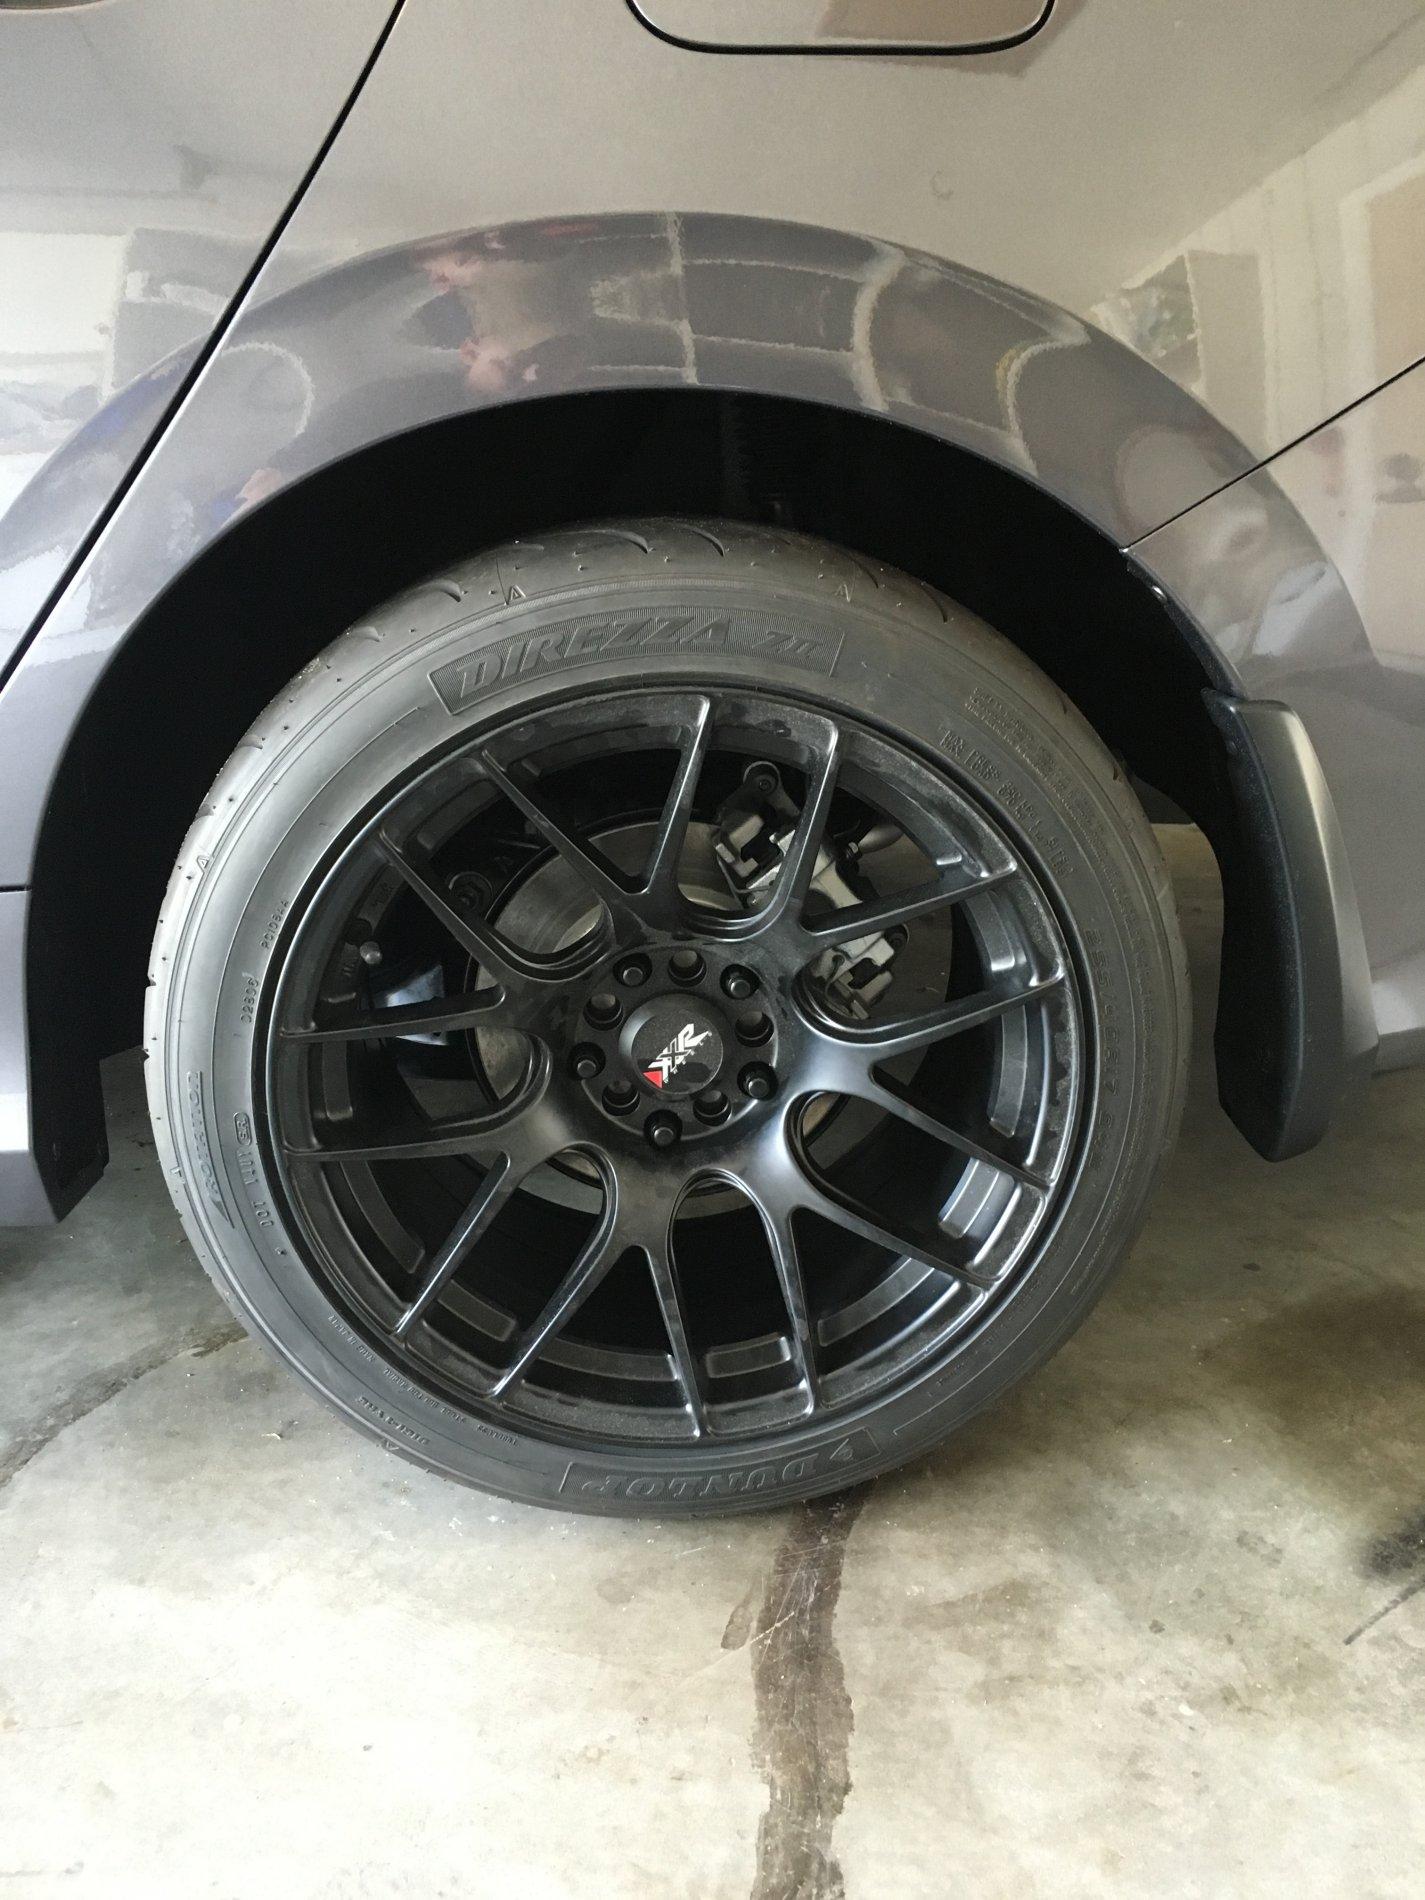 255/40R17 Rear Tires To Wide? | 2016+ Honda Civic Forum (10th Gen ...